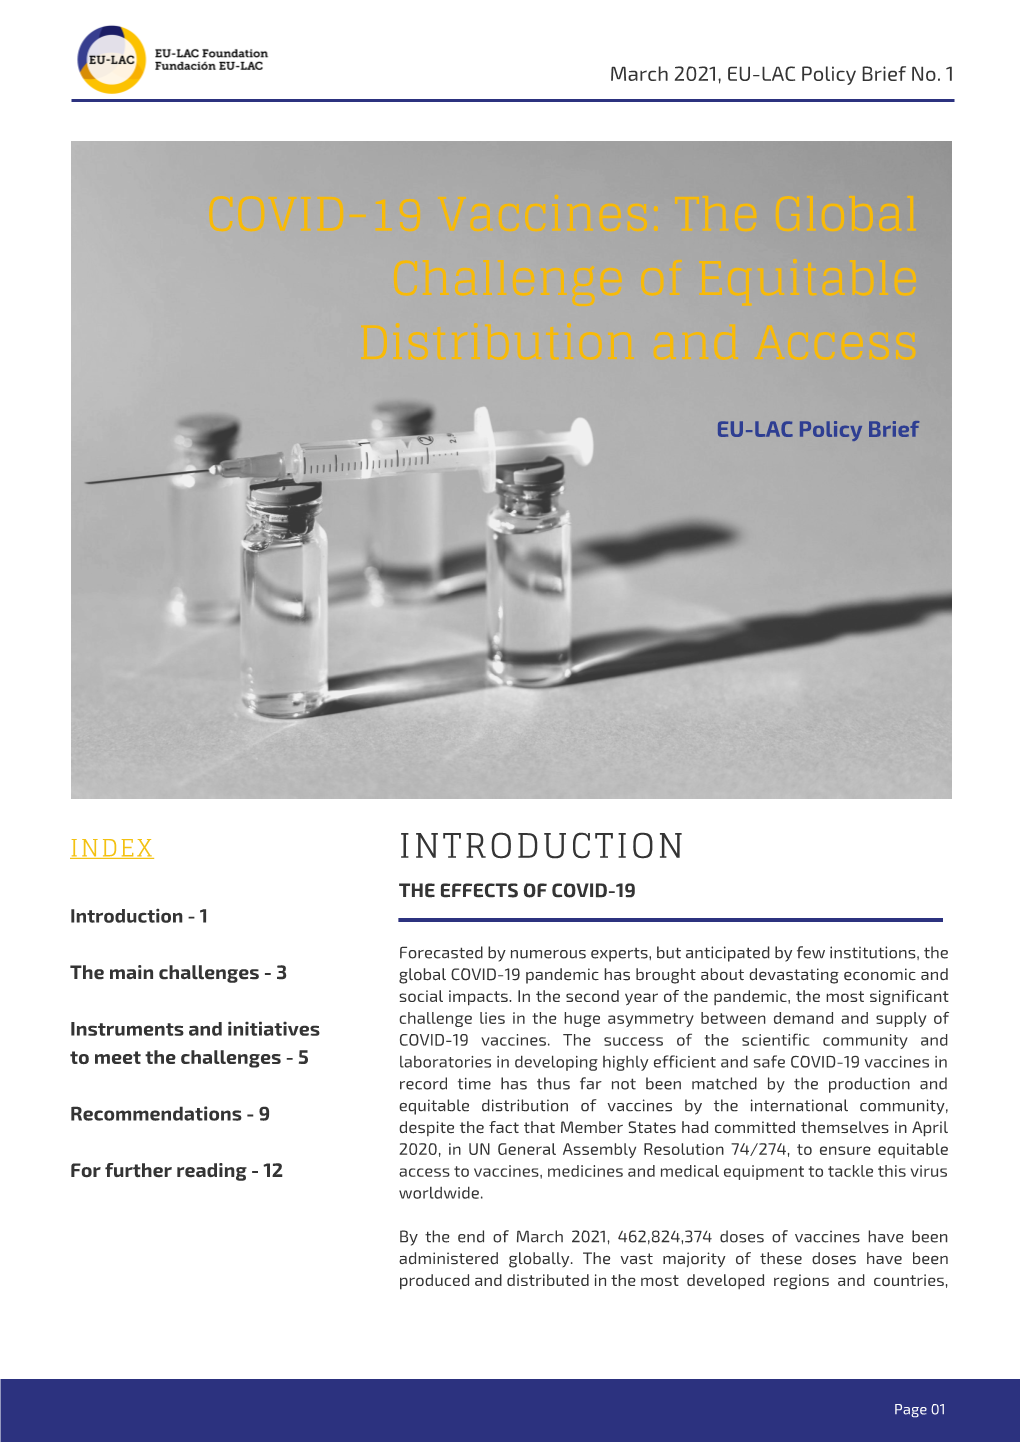 COVID-19 Vaccines: the Global Challenge of Equitable Distribution and Access